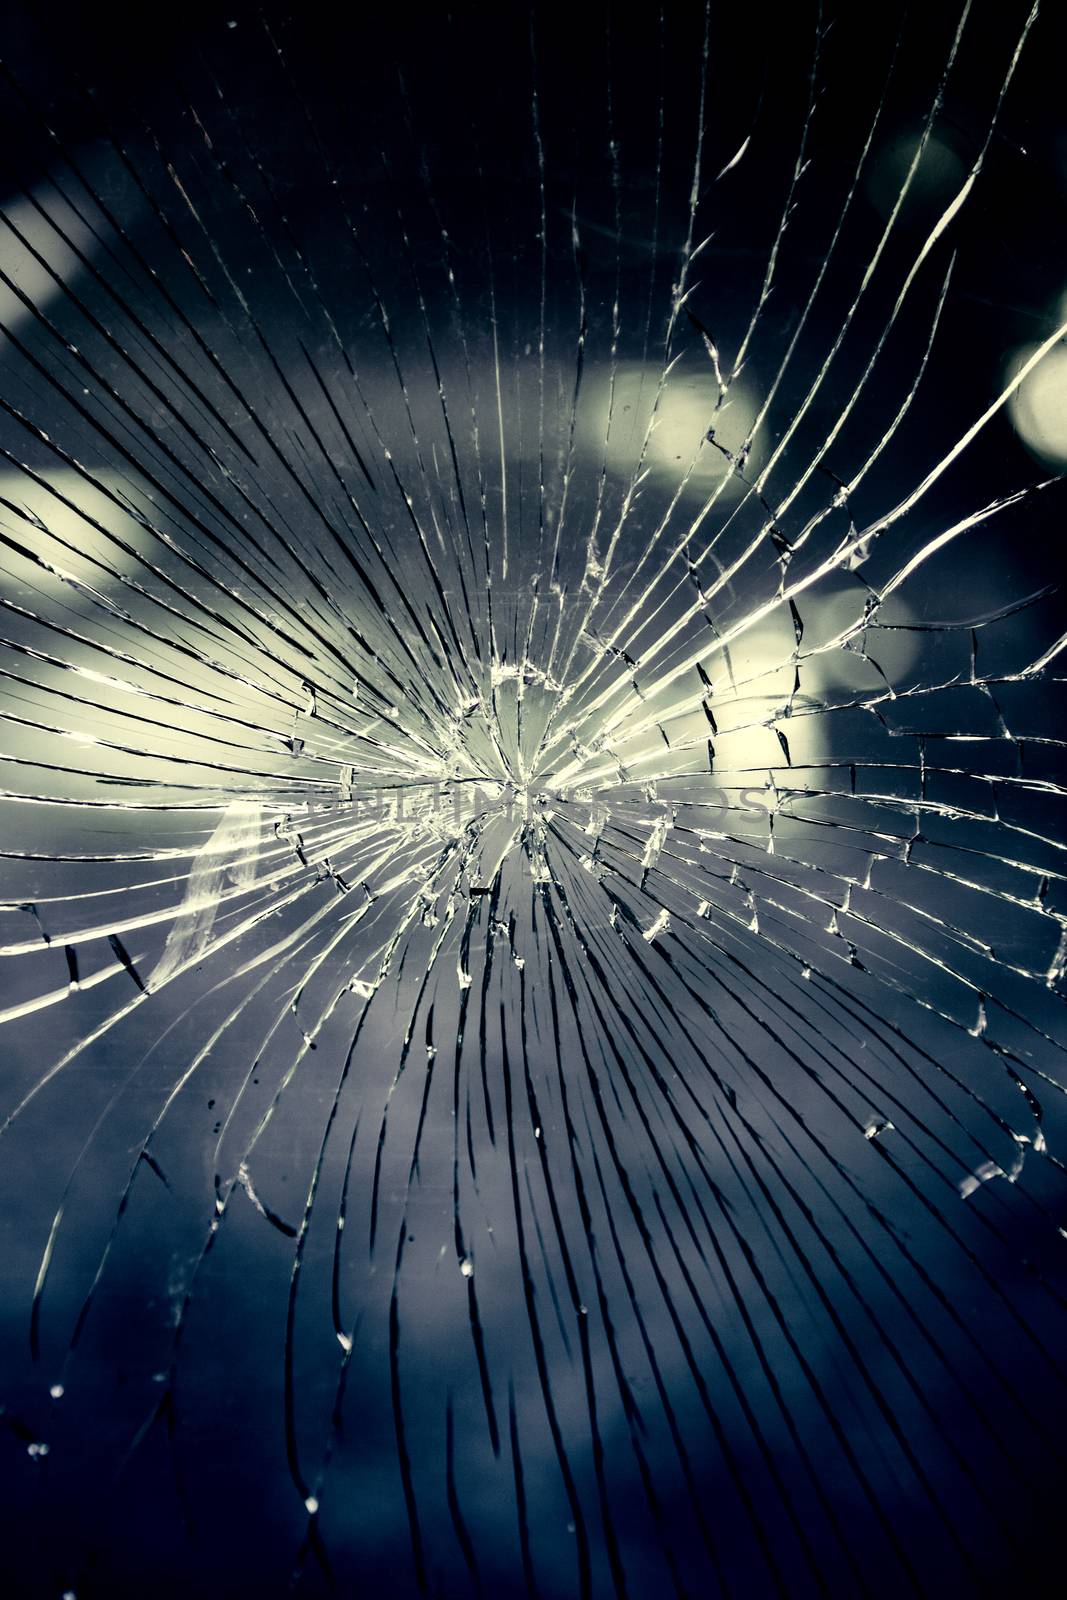 Broken and cracked glass, detail of vandalism and violence